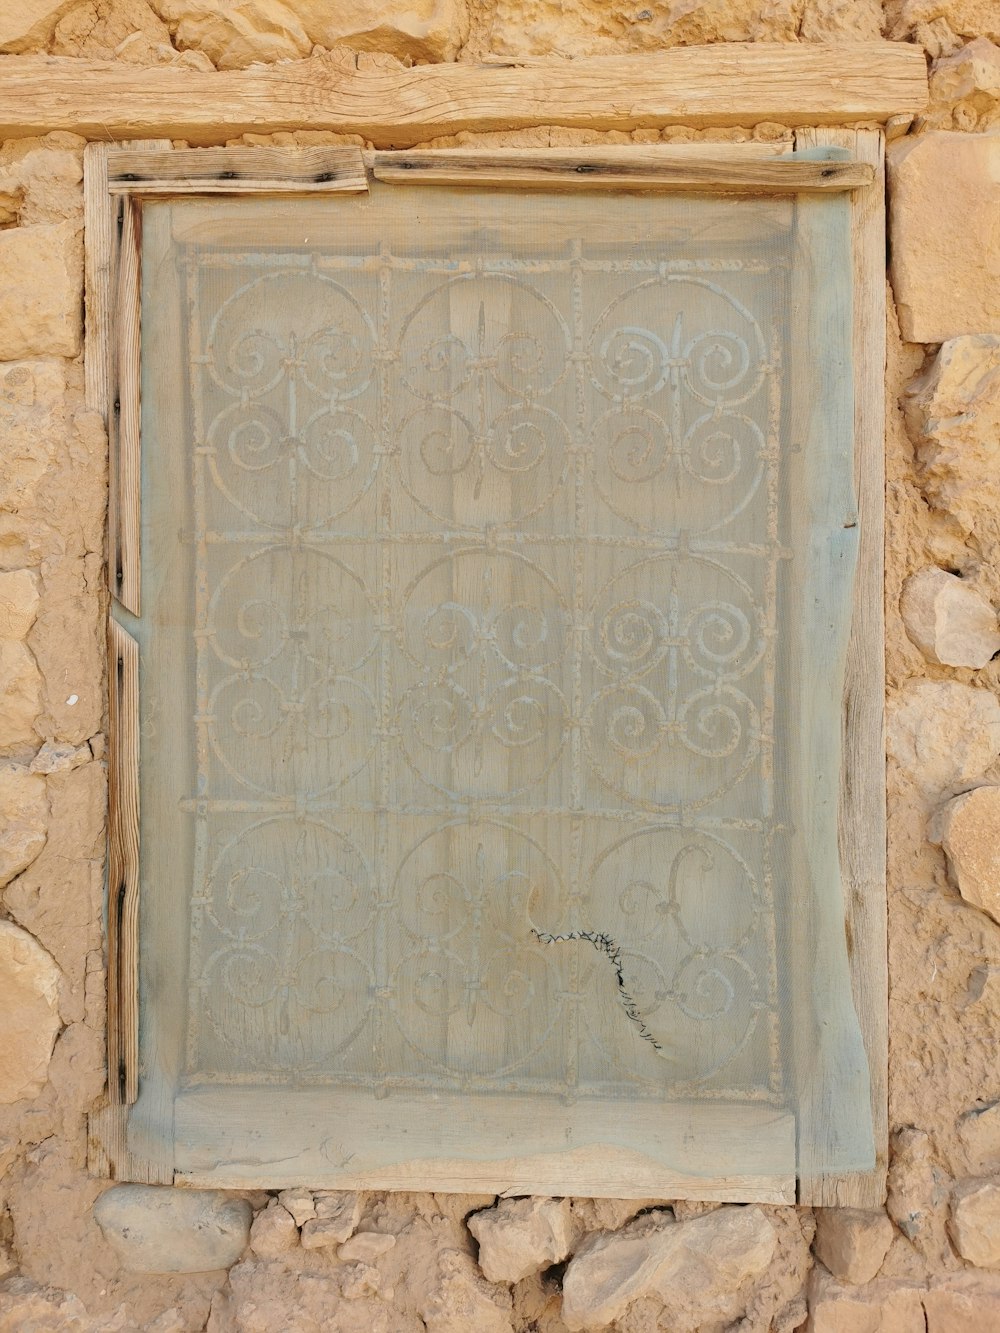 a window in a stone wall with a metal grate